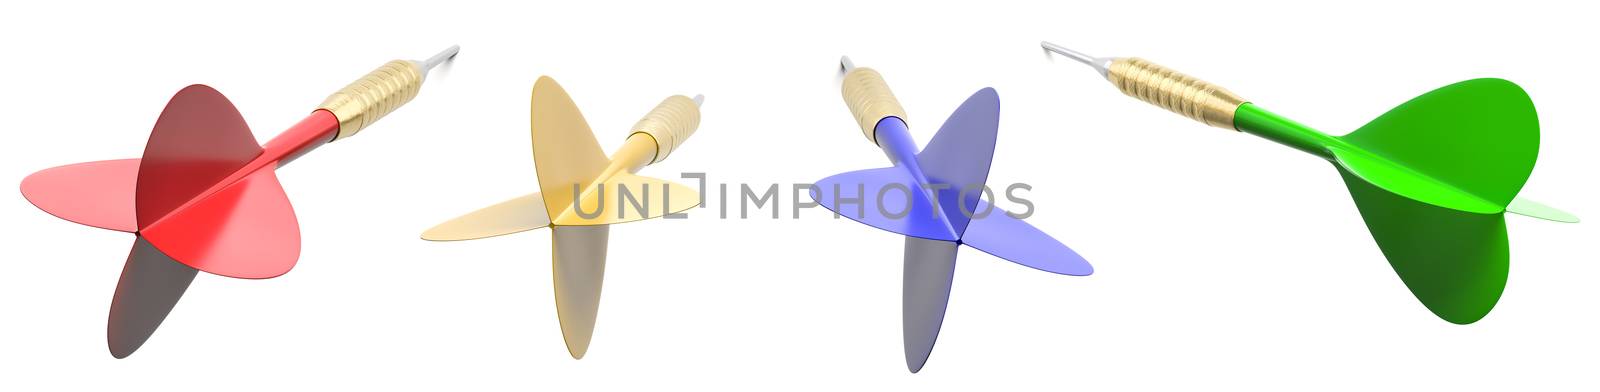 Colorful Darts Isolated on White Background 3D Illustration